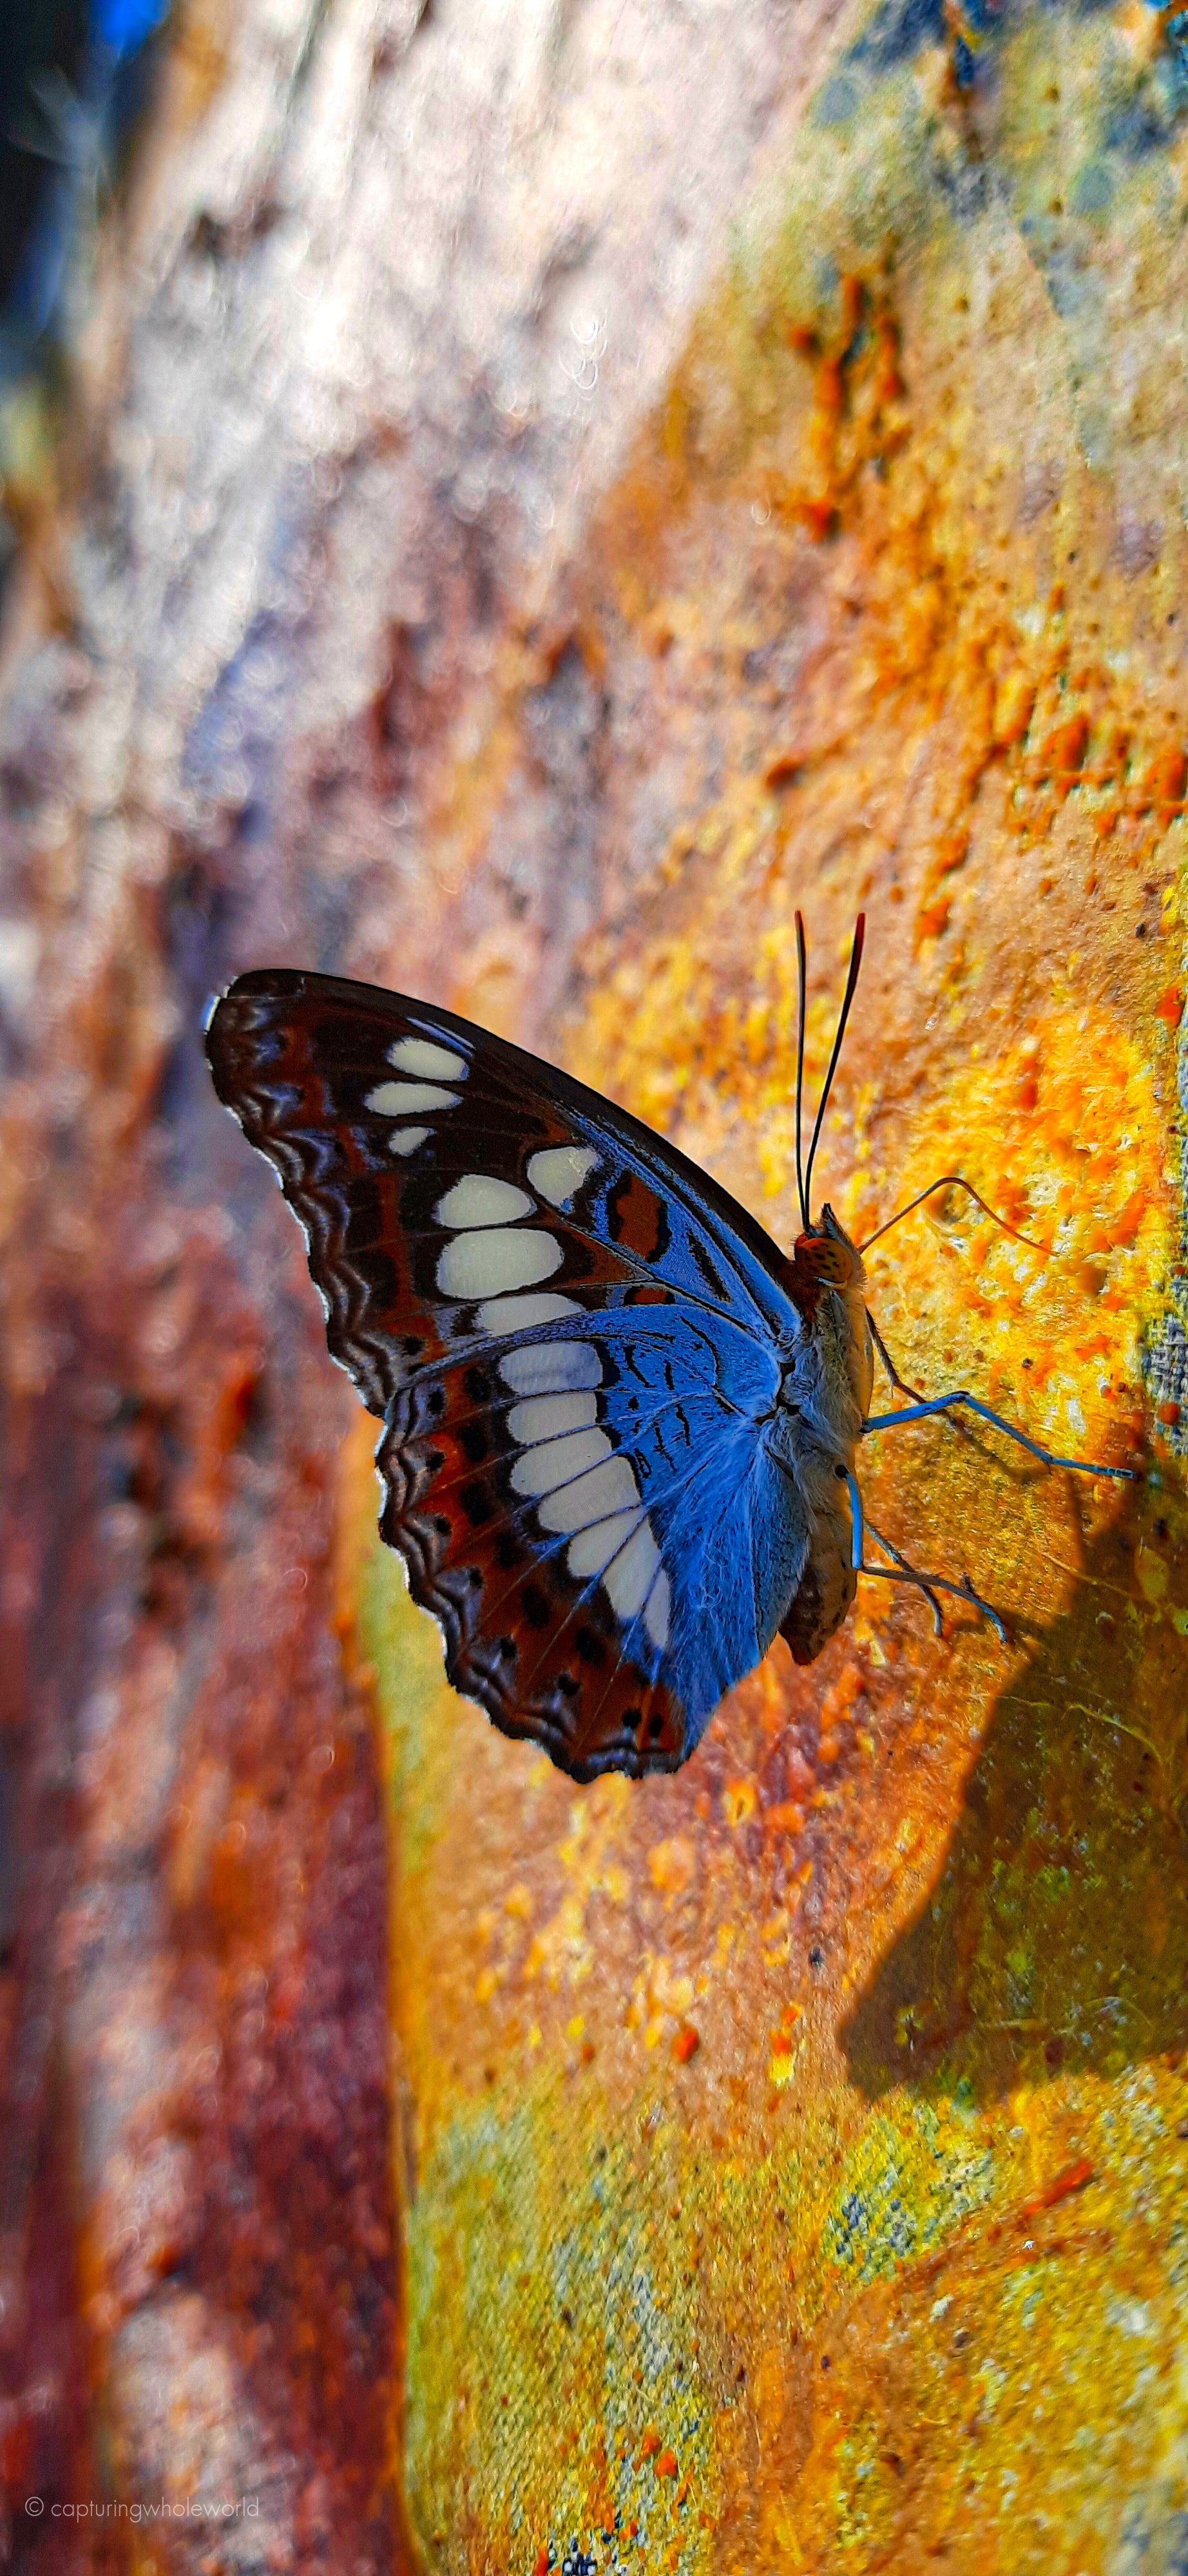 vertical wallpaper butterfly, animals, pattern, stains, spots, wings, profile